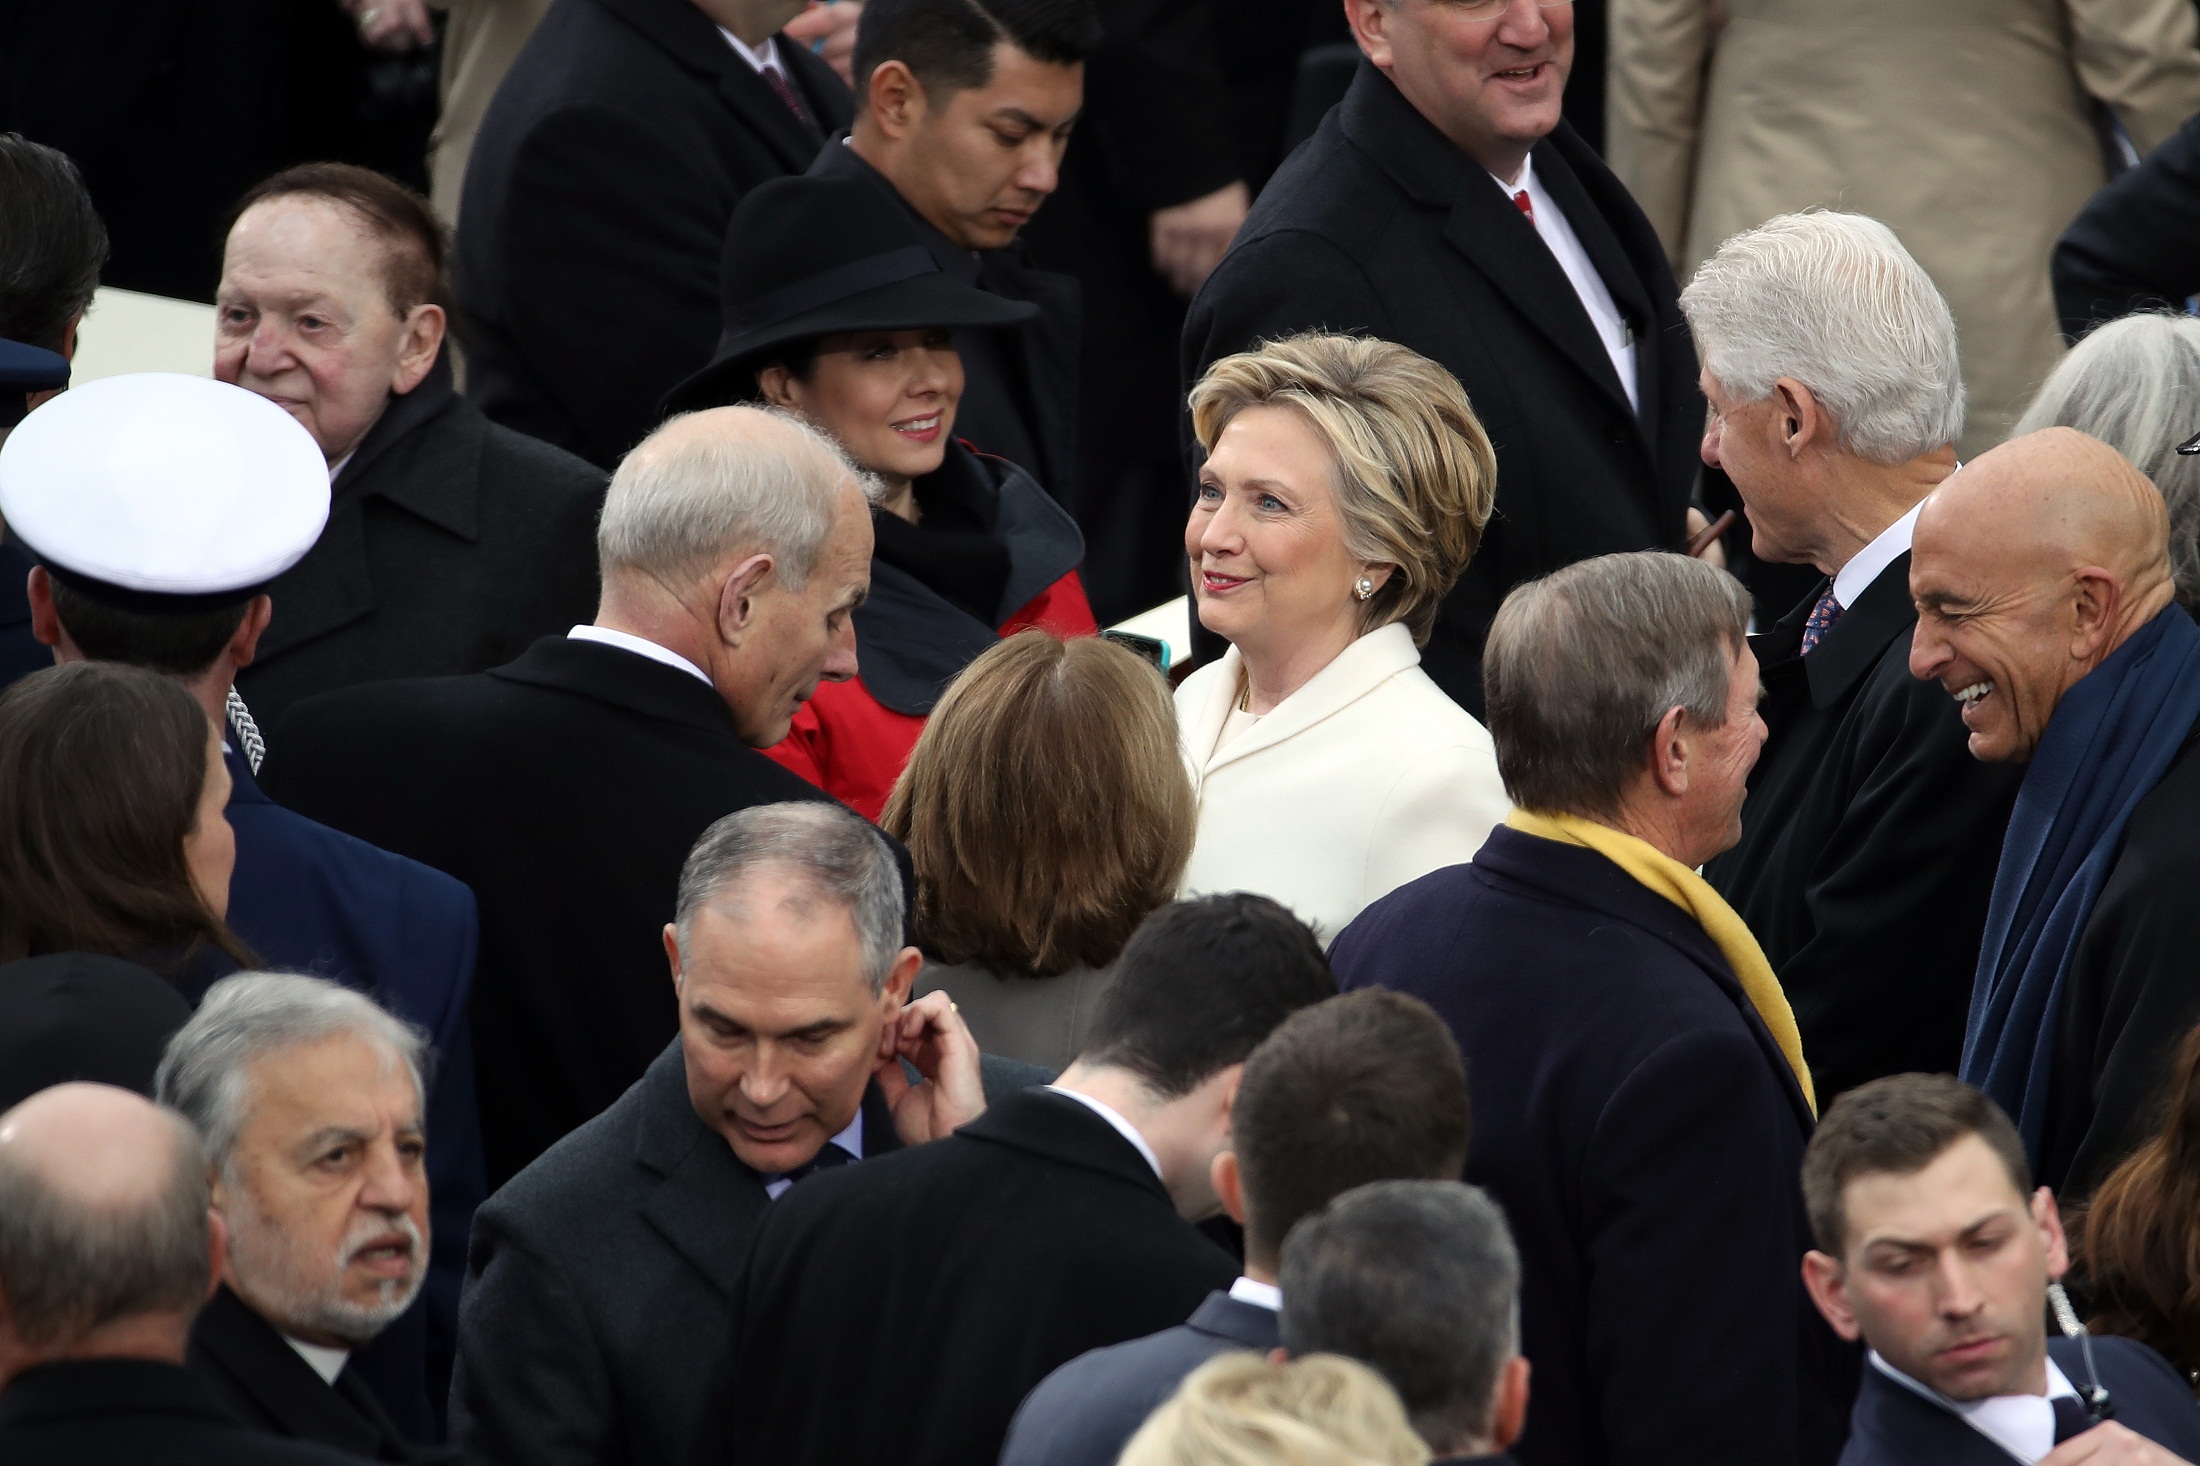 WASHINGTON, DC - JANUARY 20: Former Democratic presidential nominee Hillary Clinton (C) and former President Bill Clinton (R) arrive on the West Front of the U.S. Capitol on January 20, 2017 in Washington, DC. In today's inauguration ceremony Donald J. Trump becomes the 45th president of the United States.   Drew Angerer/Getty Images/AFP